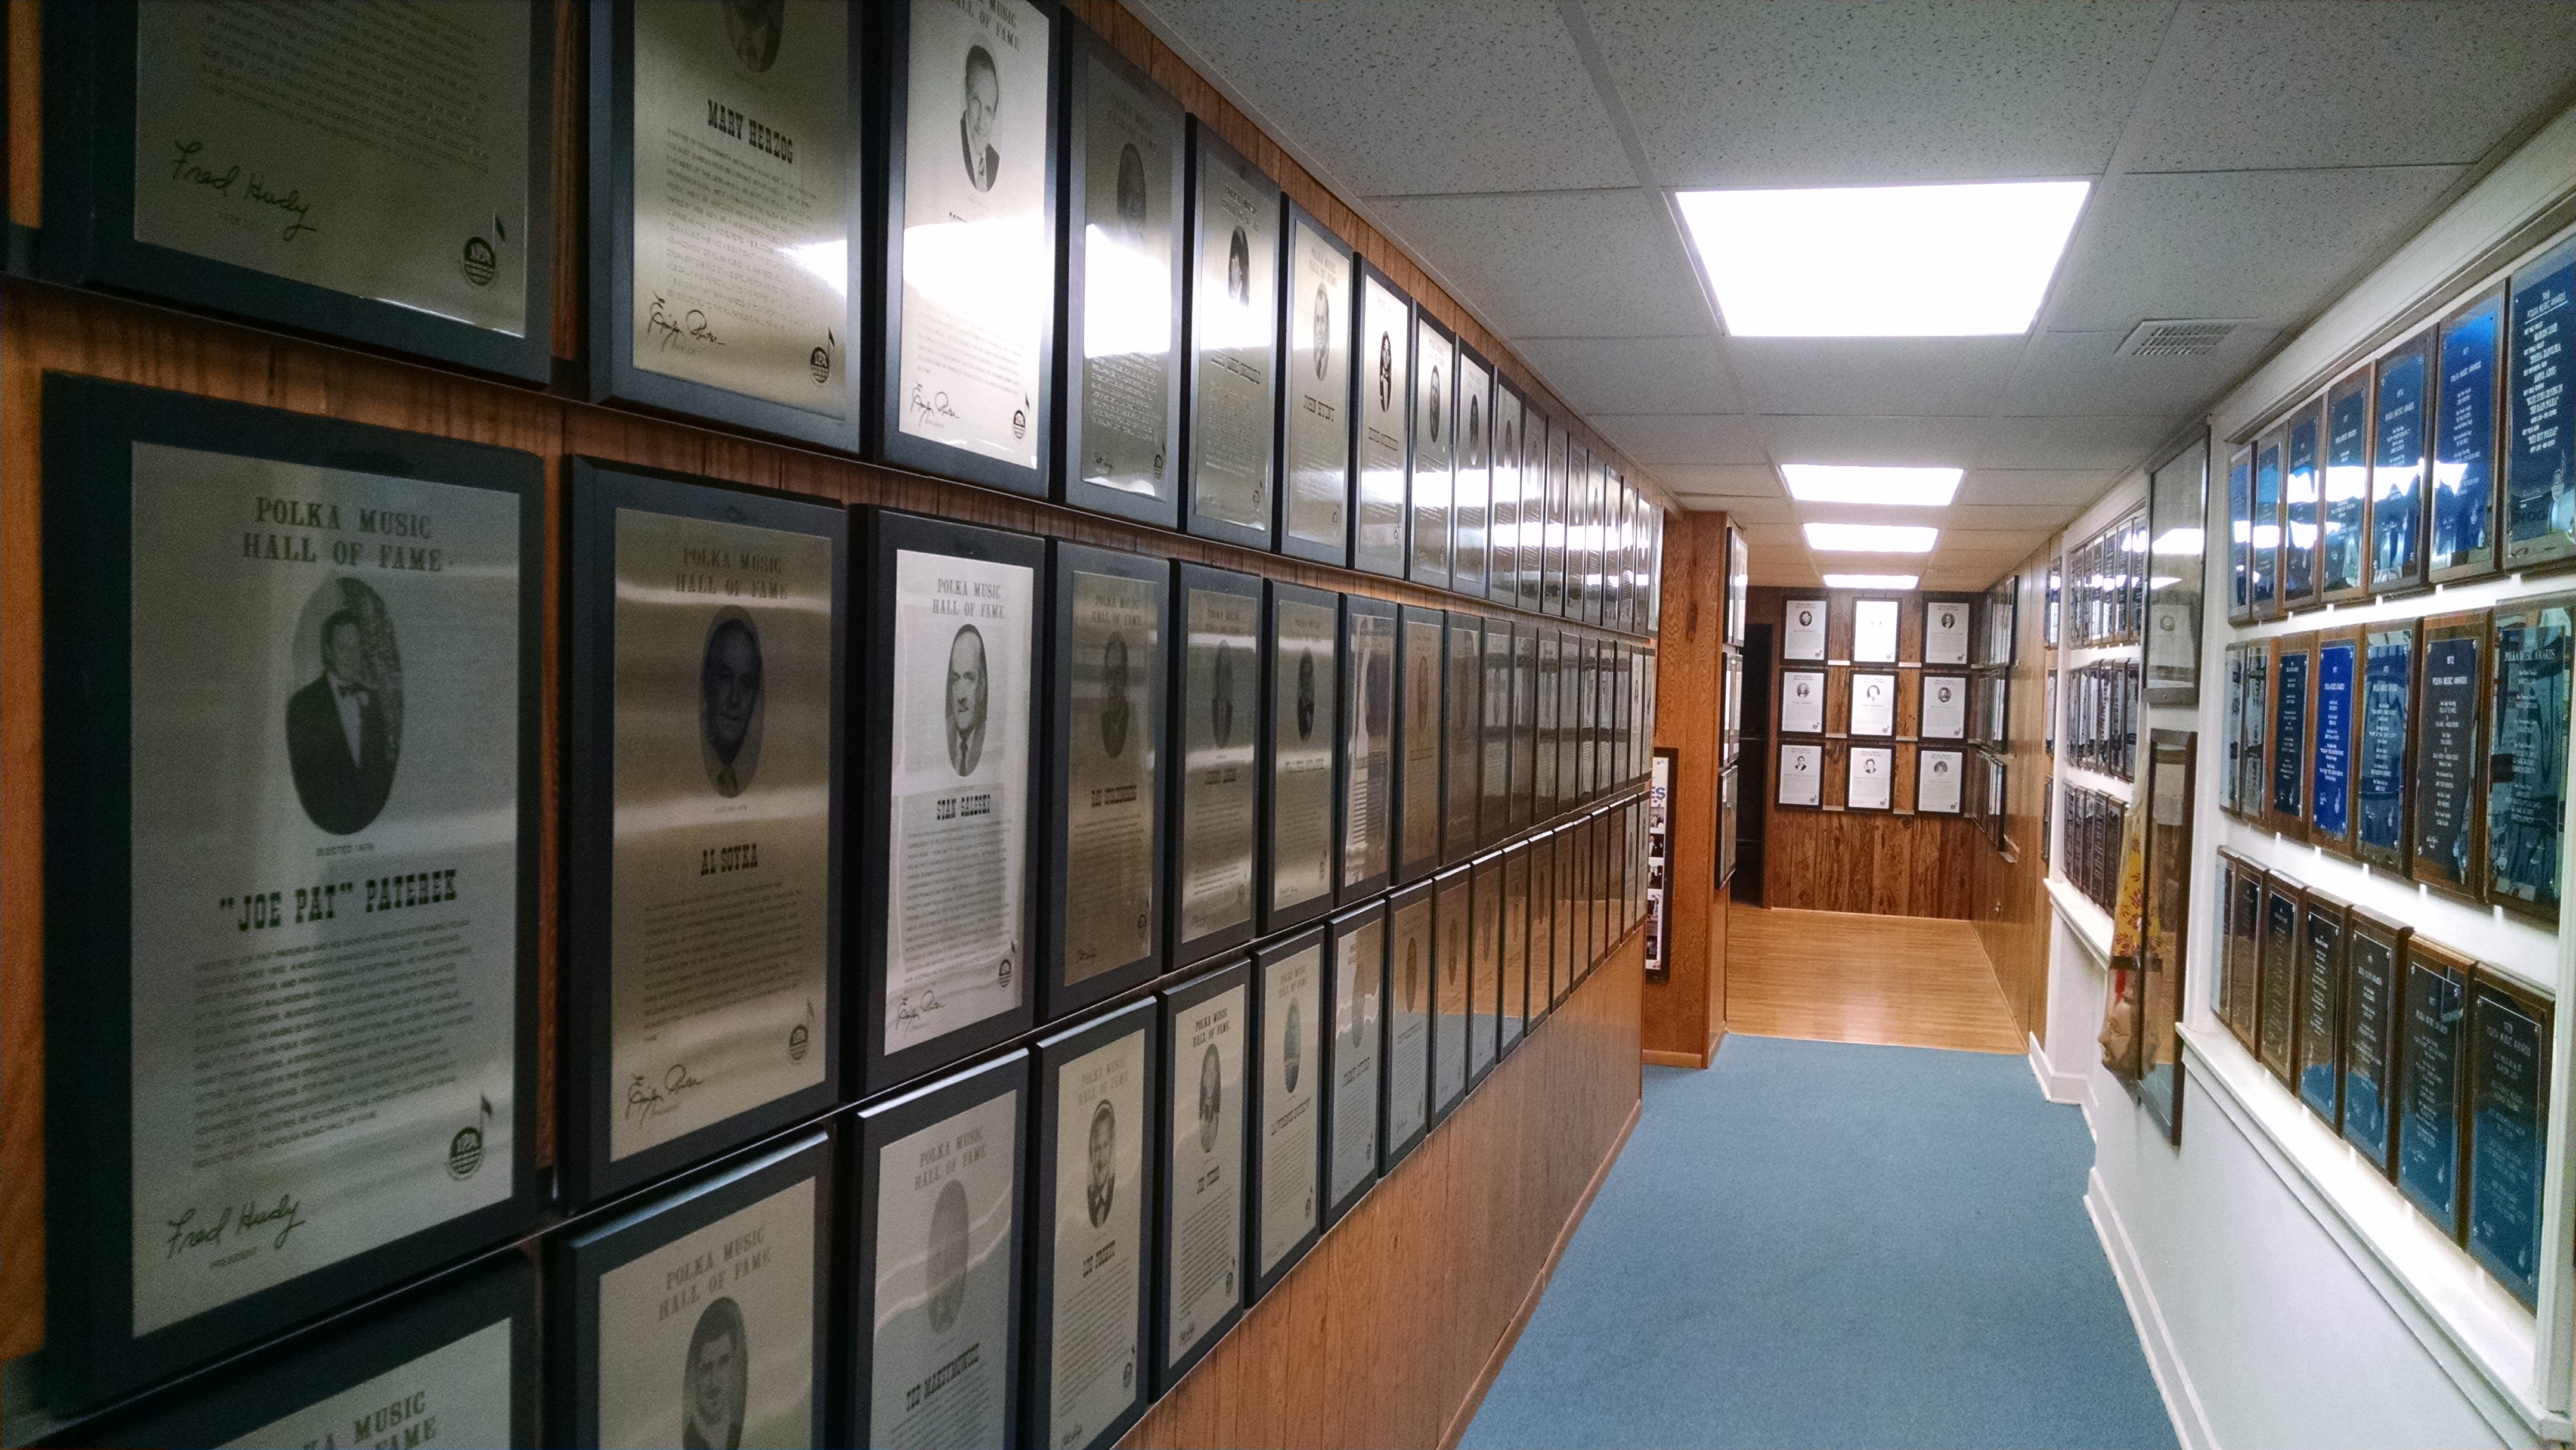 Our History & Hall of Fame